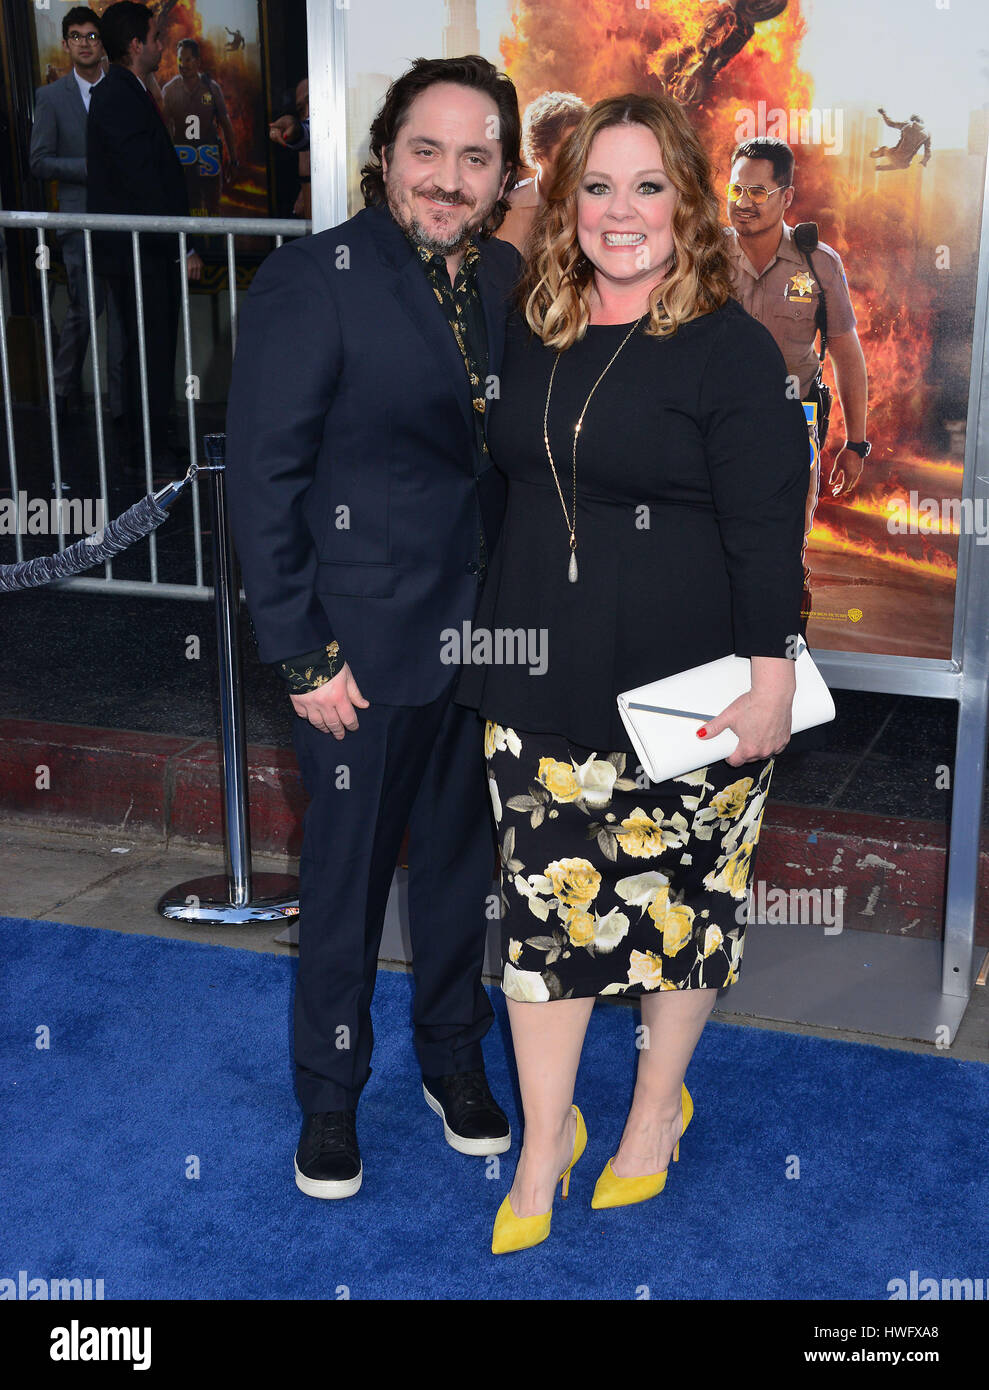 Los Angeles, USA. 20th Mar, 2017. Melissa McCarthy, Ben Falcone 040  arriving at the CHIPS Premiere